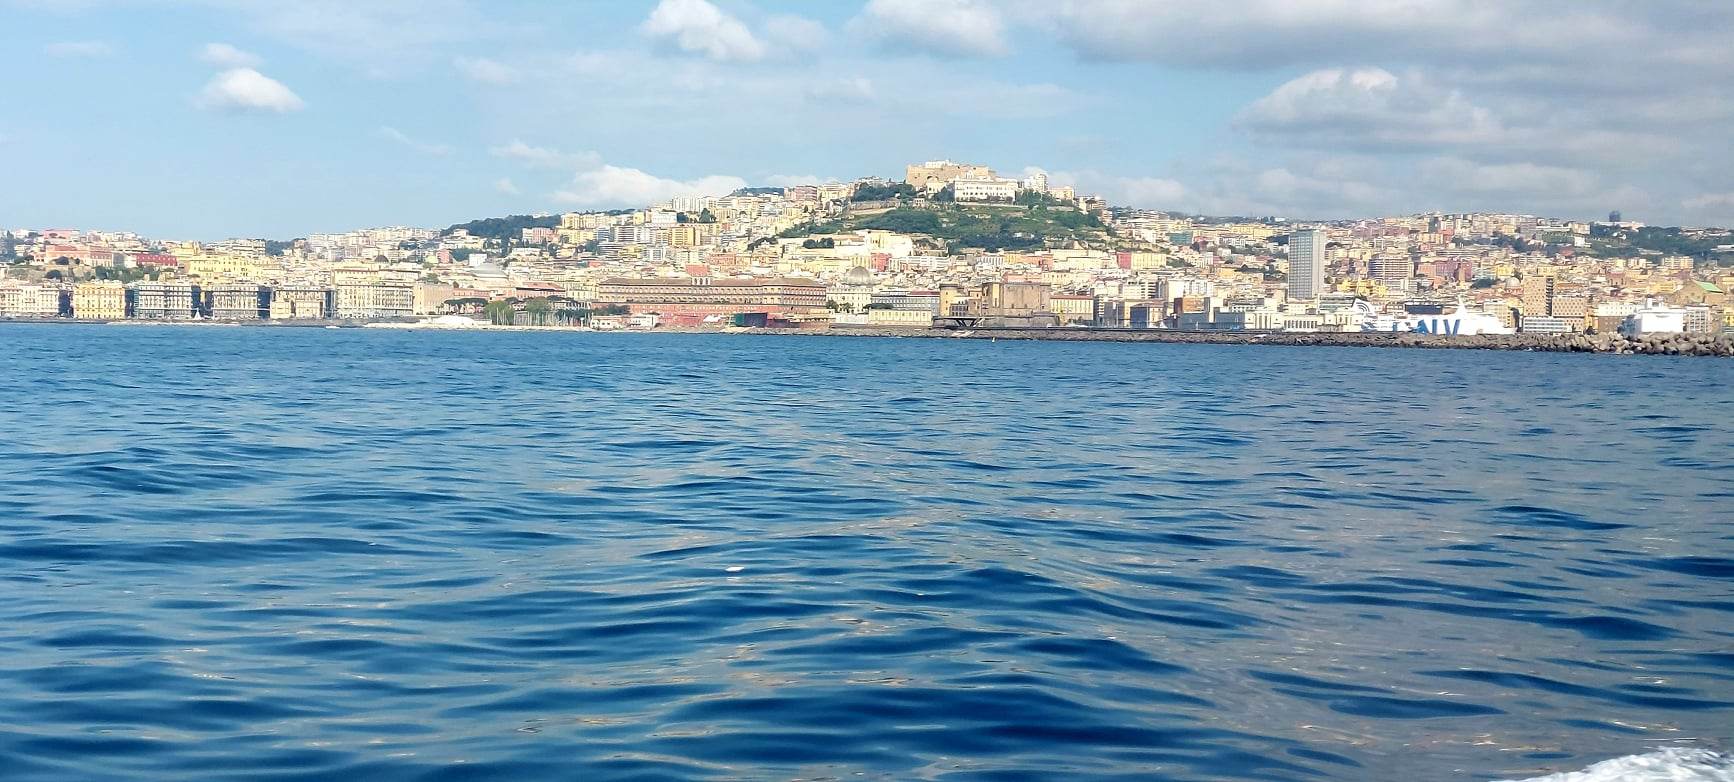 naples from the hydrofoil